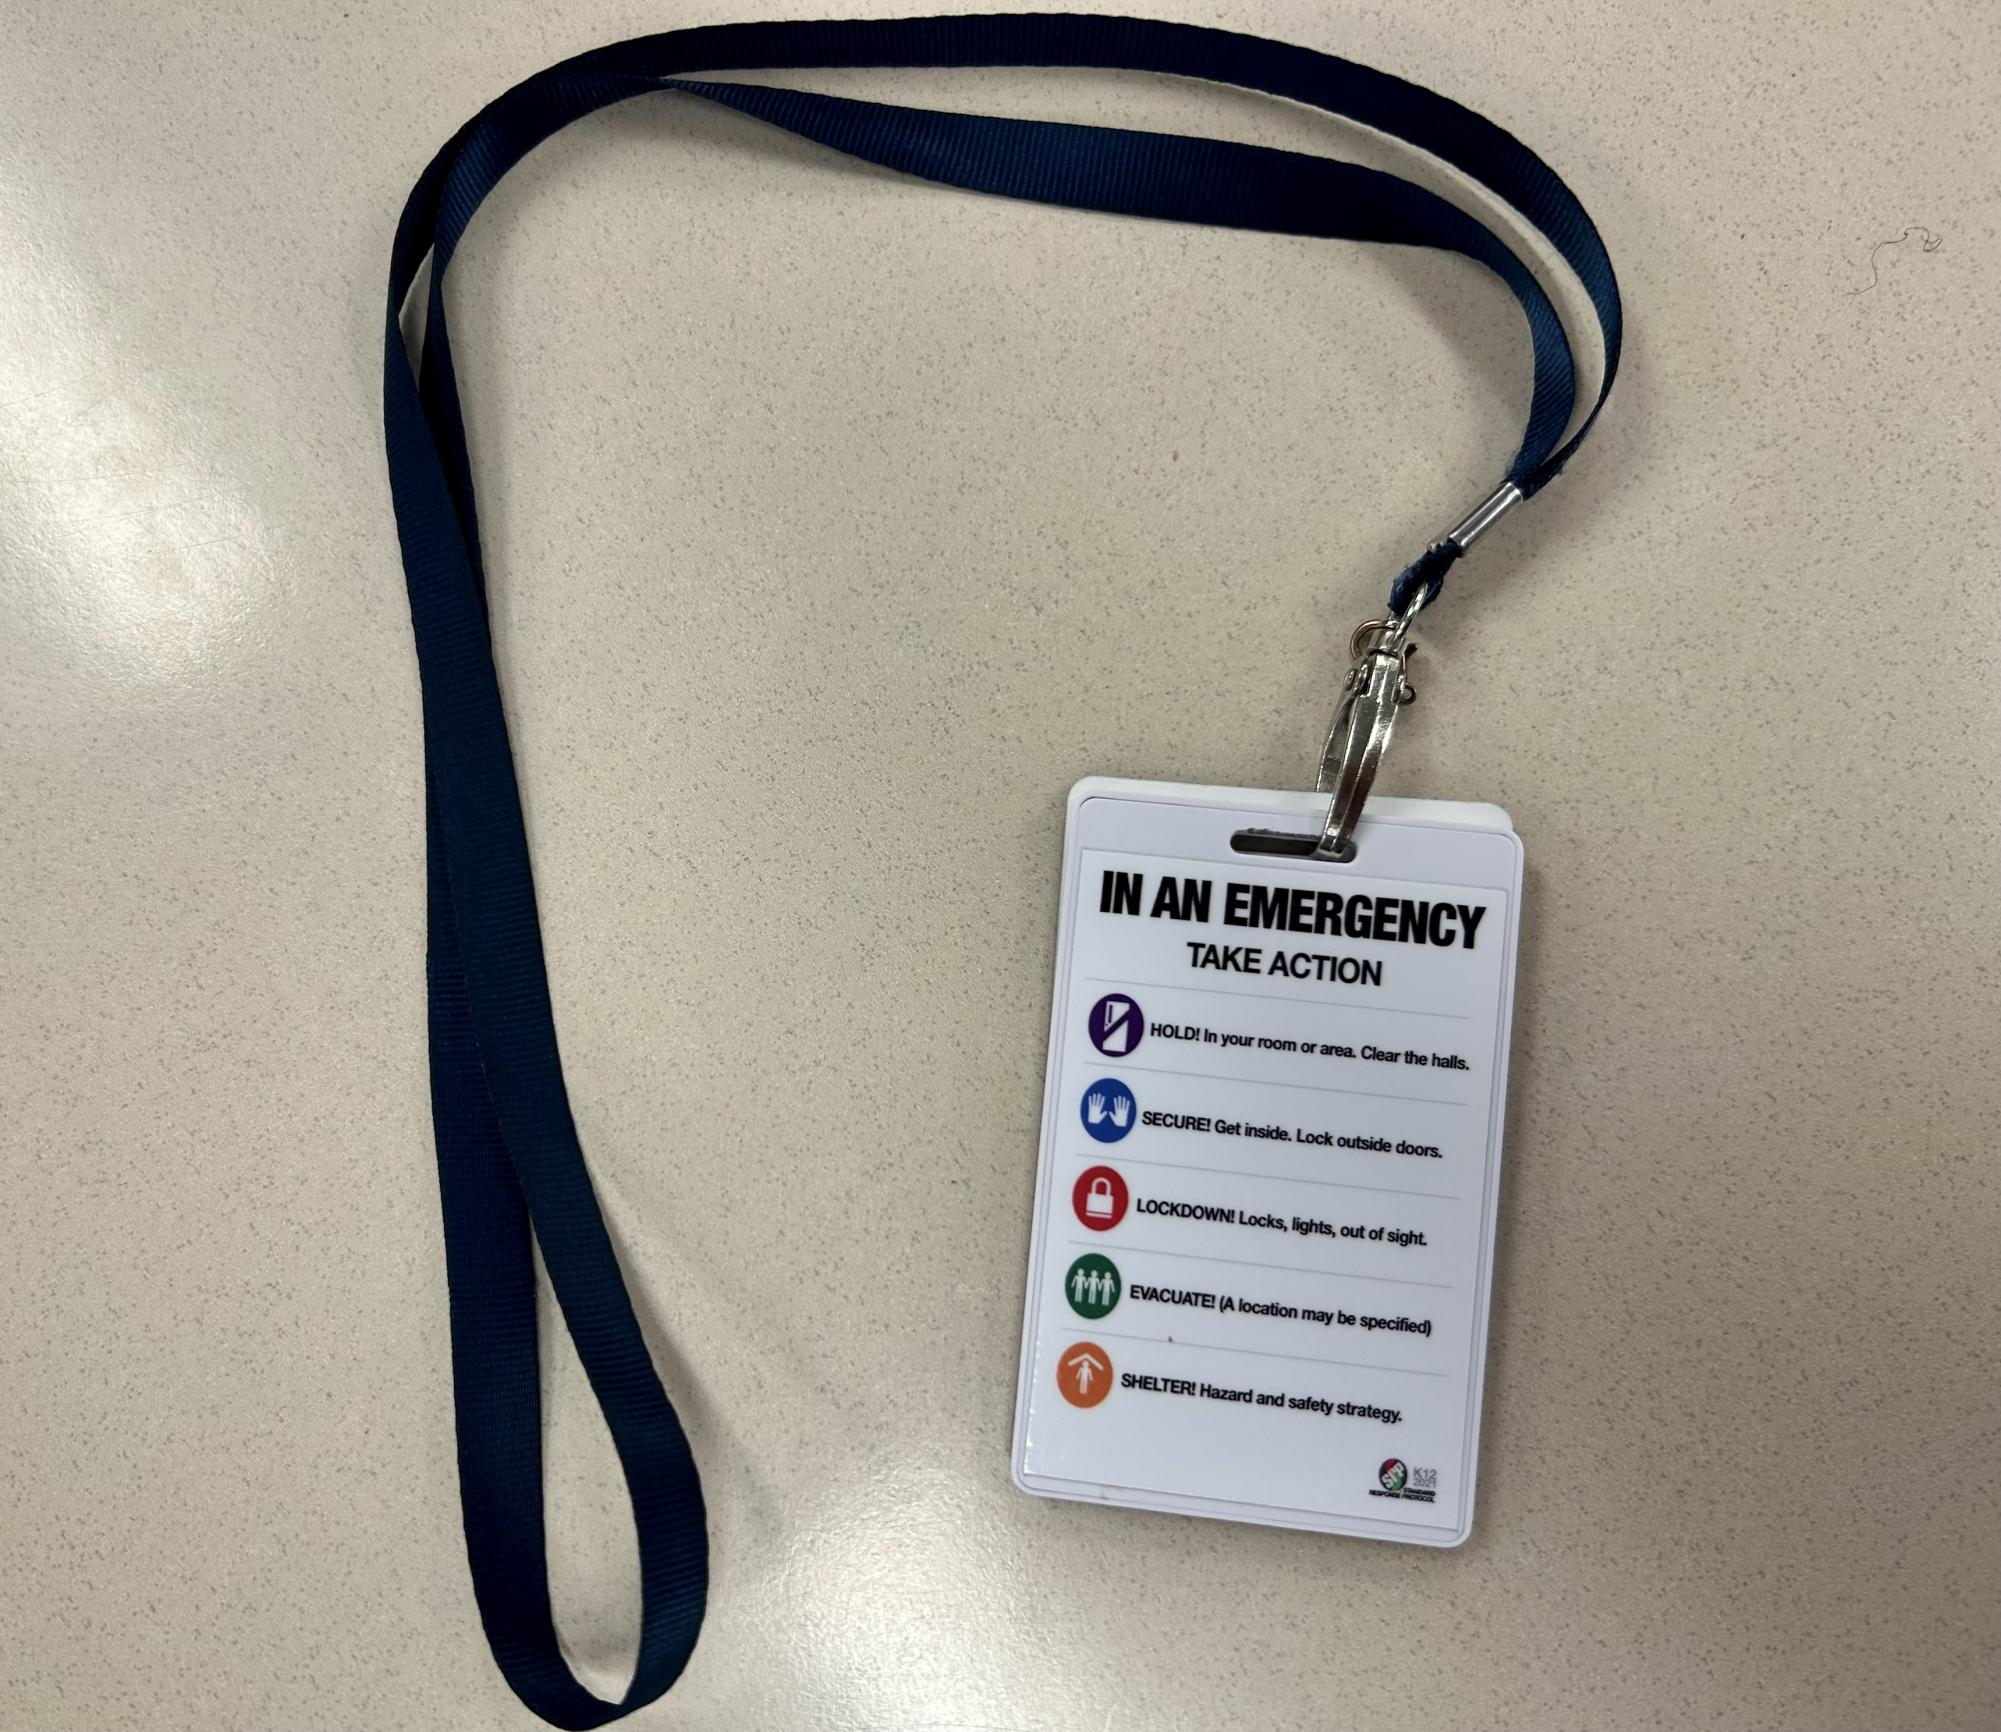 Burroughs personnel are each given a lanyard with the new safetry infomation.